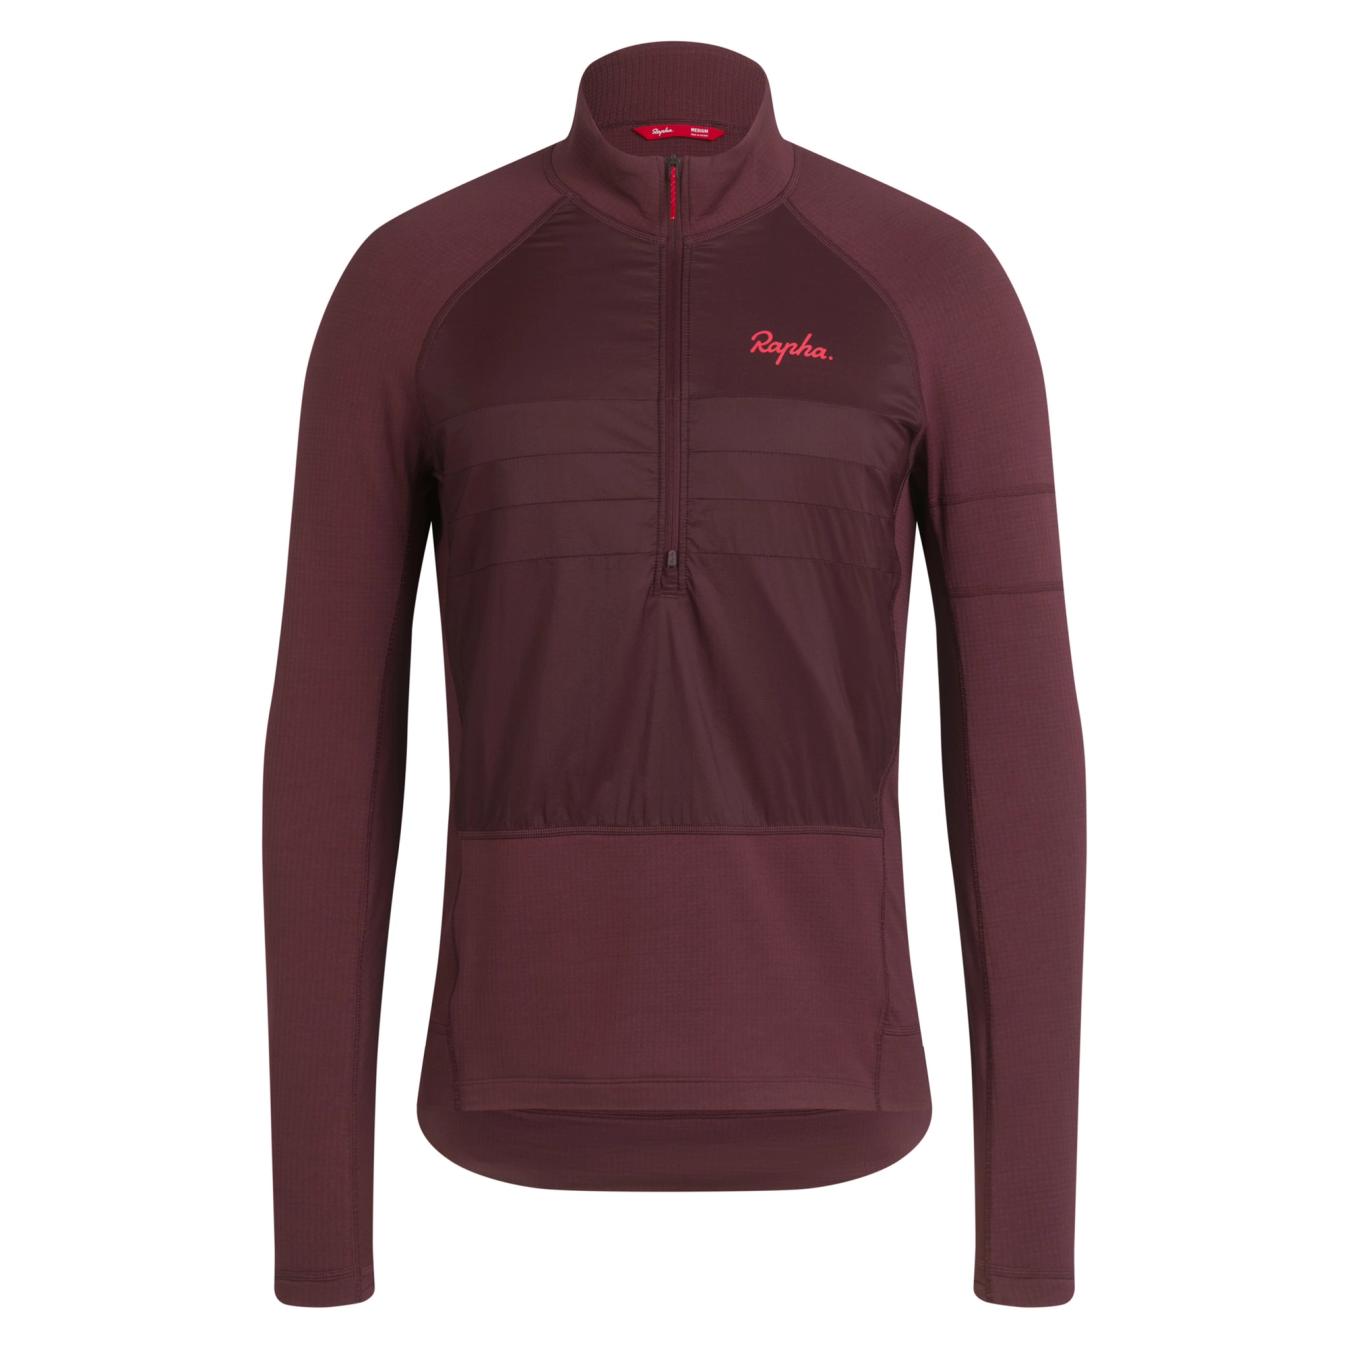 The men's Explore zip neck pullover includes a chest pocket and two ventilation zips 